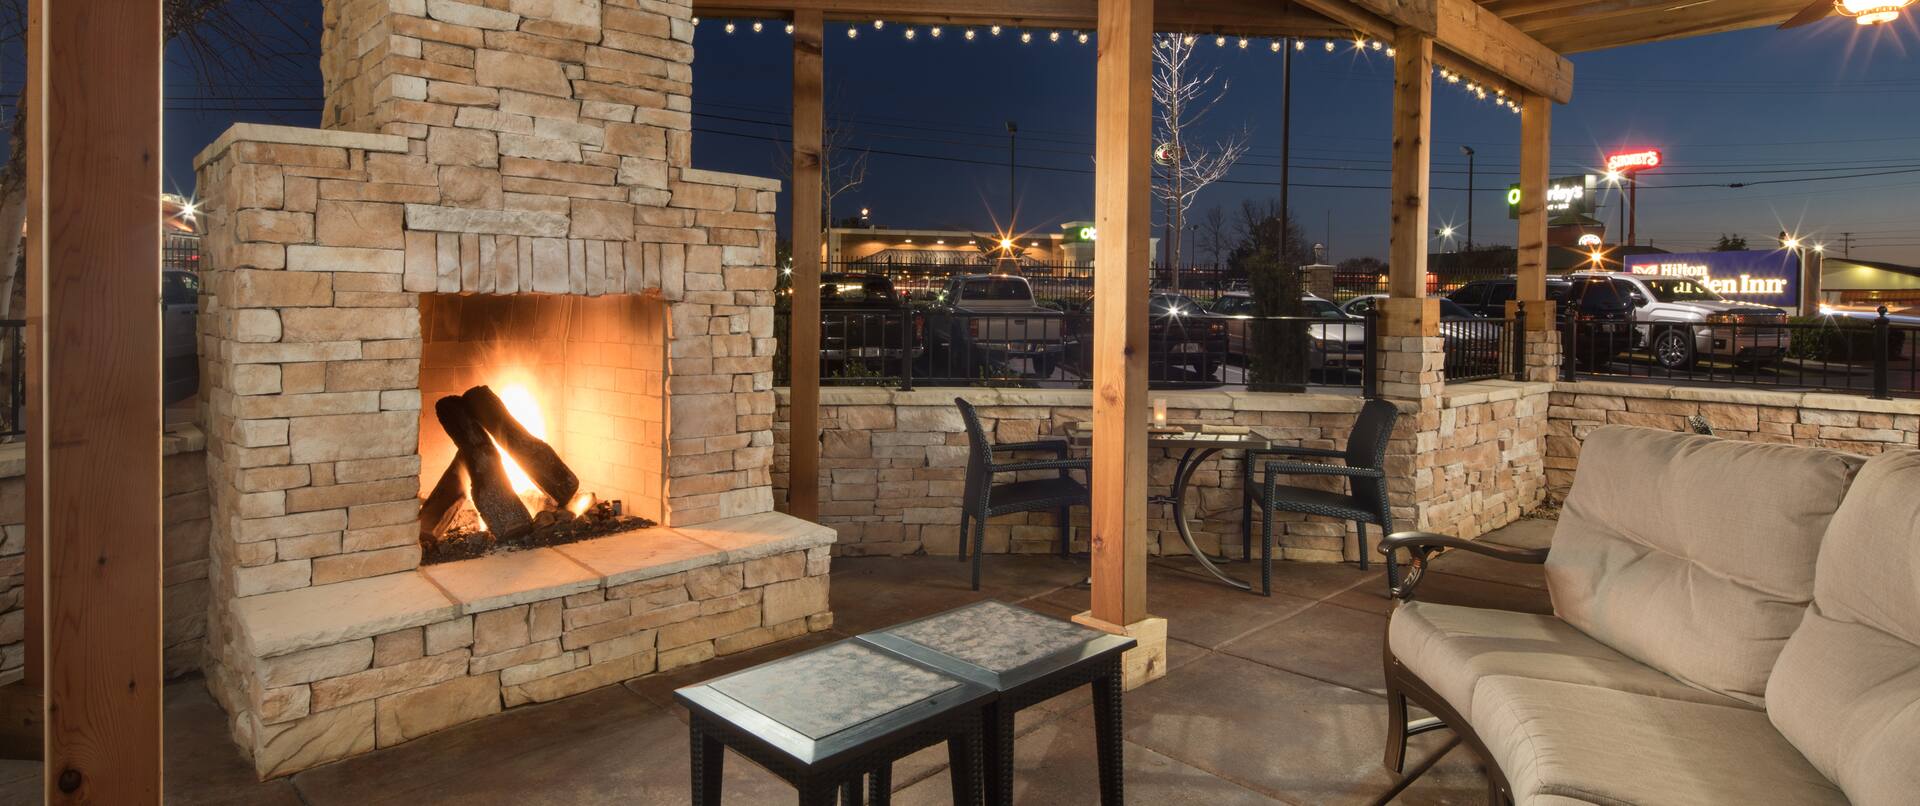 Patio Fireplace and Seating Area